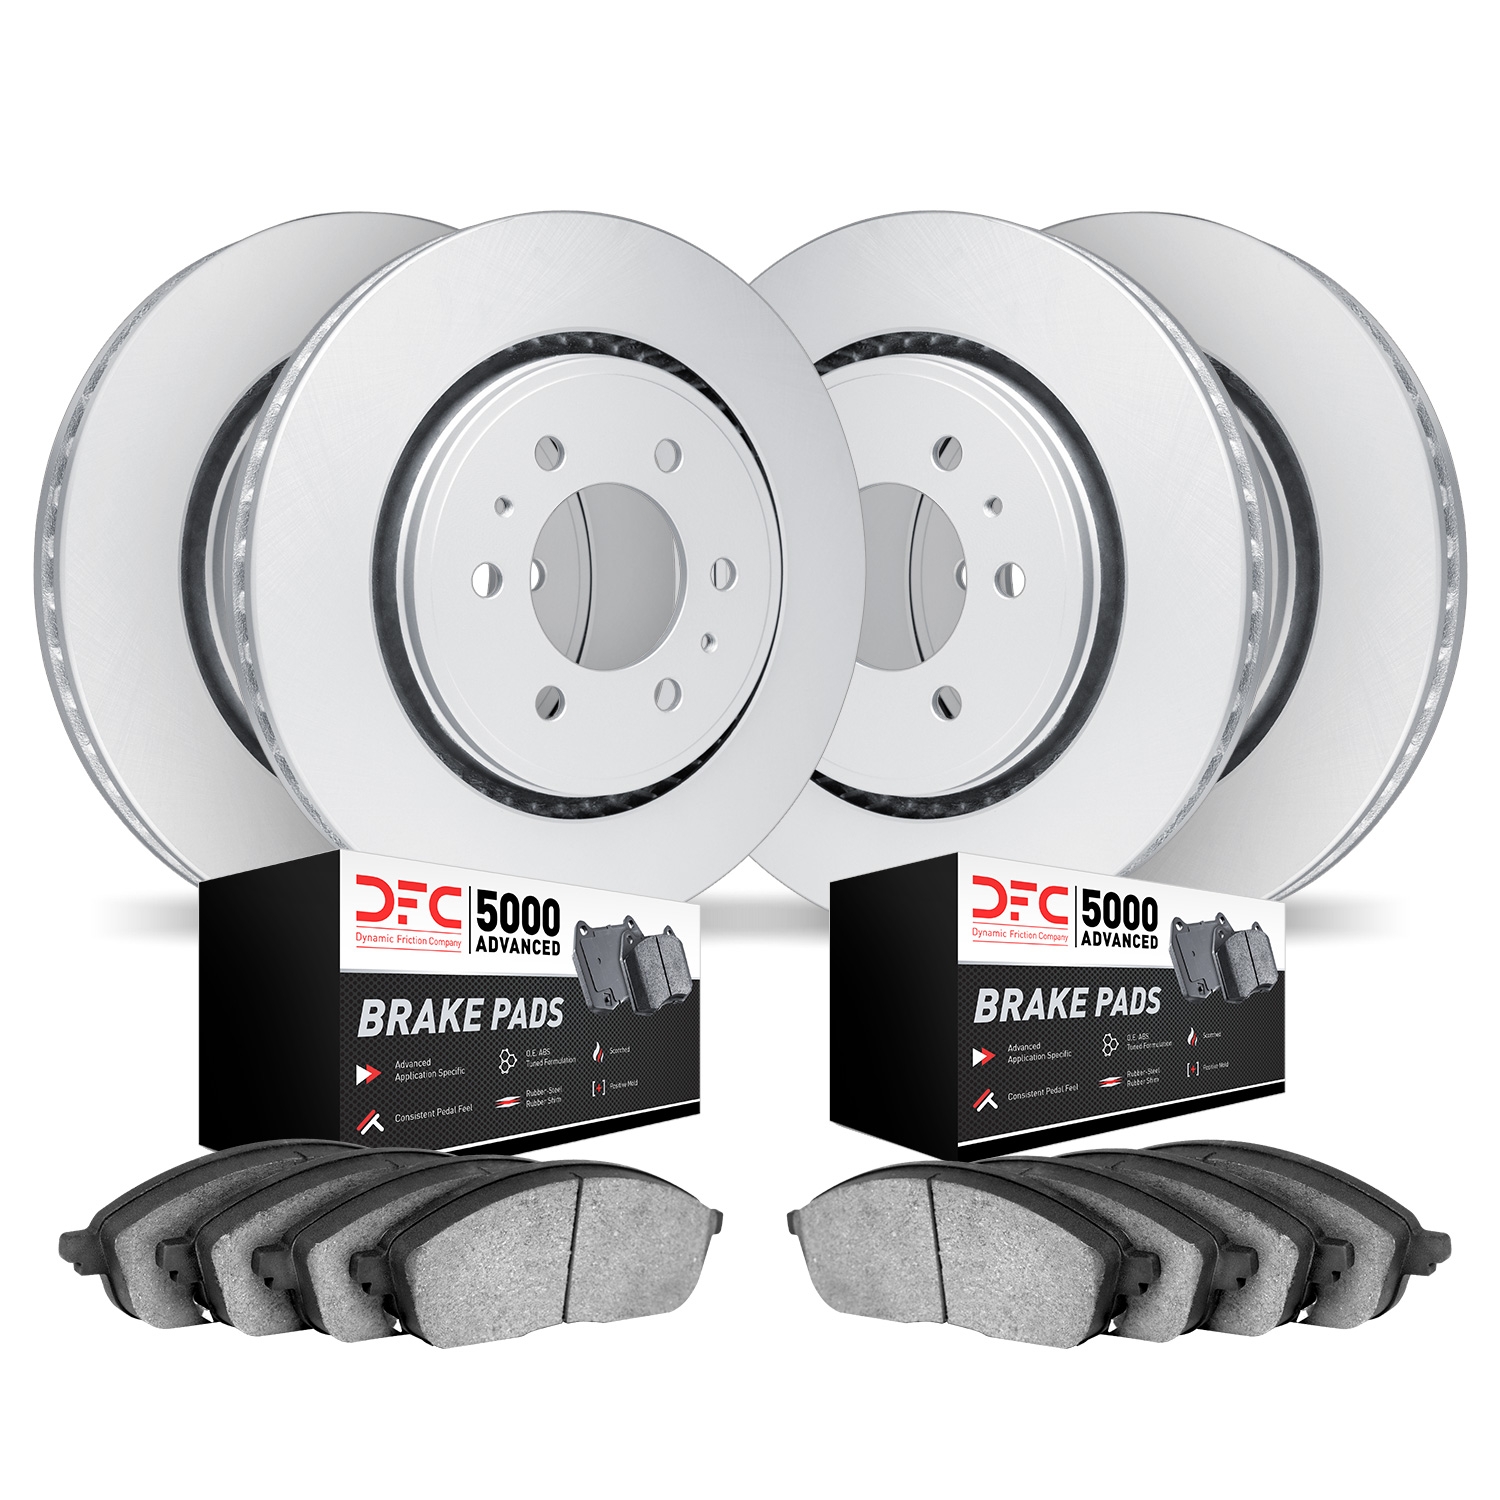 4504-48031 Geospec Brake Rotors w/5000 Advanced Brake Pads Kit, 2009-2014 GM, Position: Front and Rear